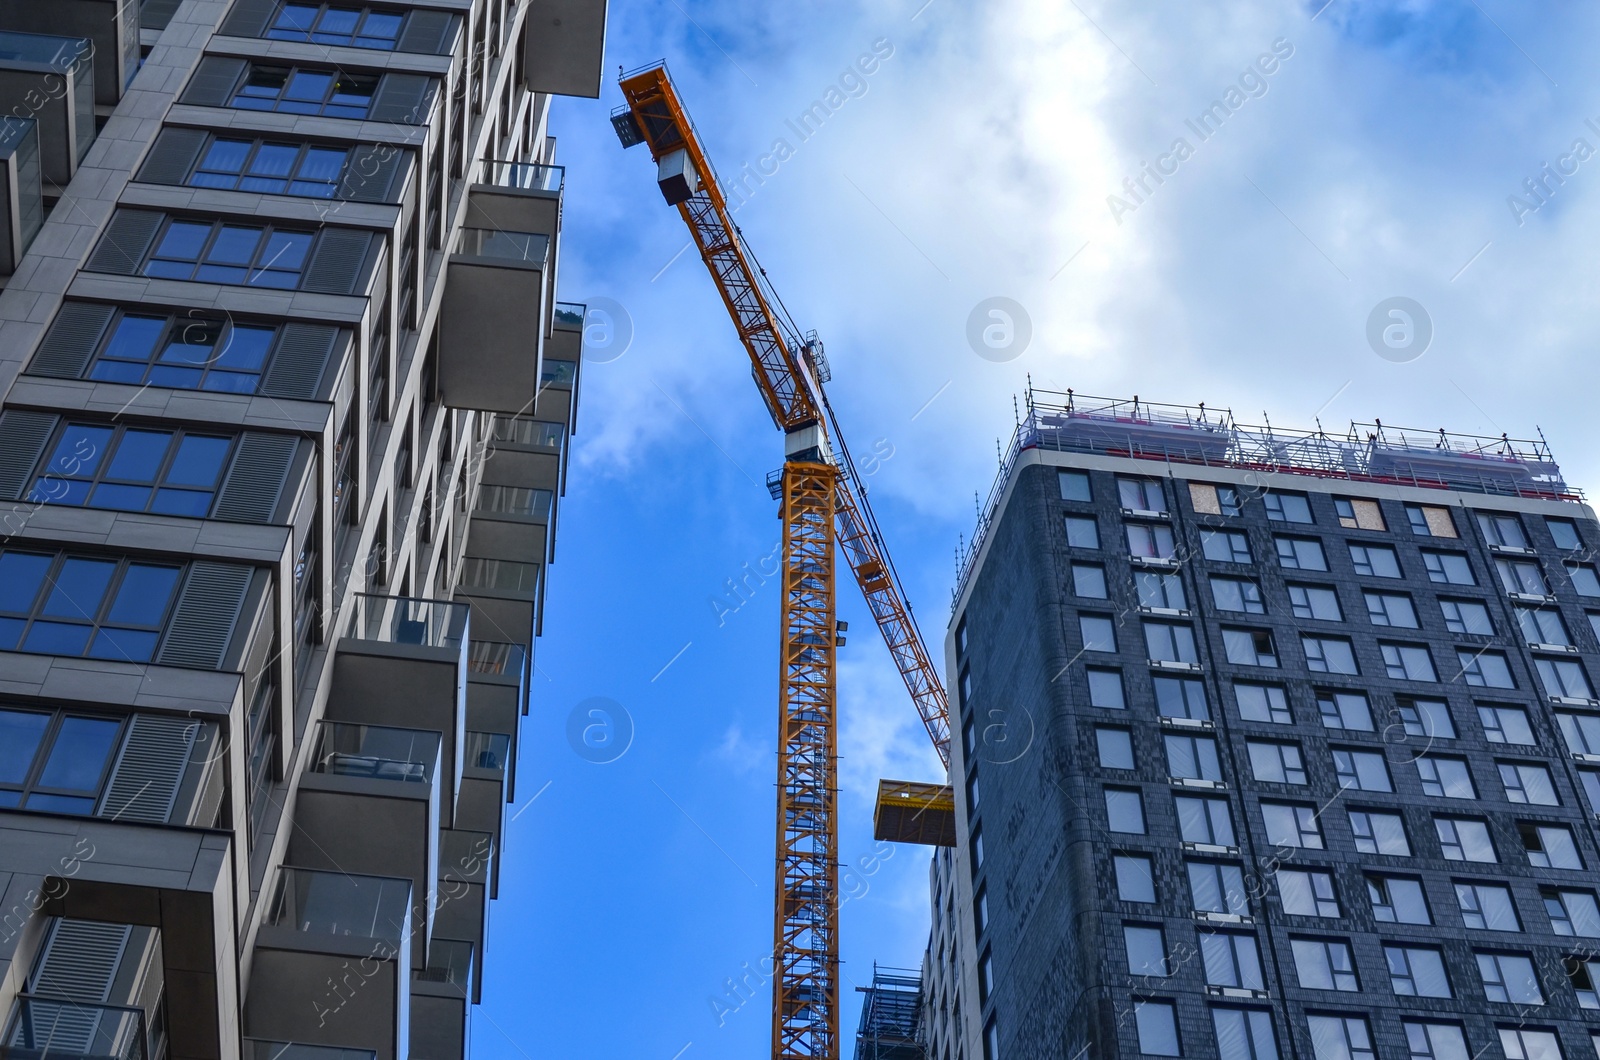 Photo of Exterior of beautiful buildings and construction crane against blue sky, low angle view